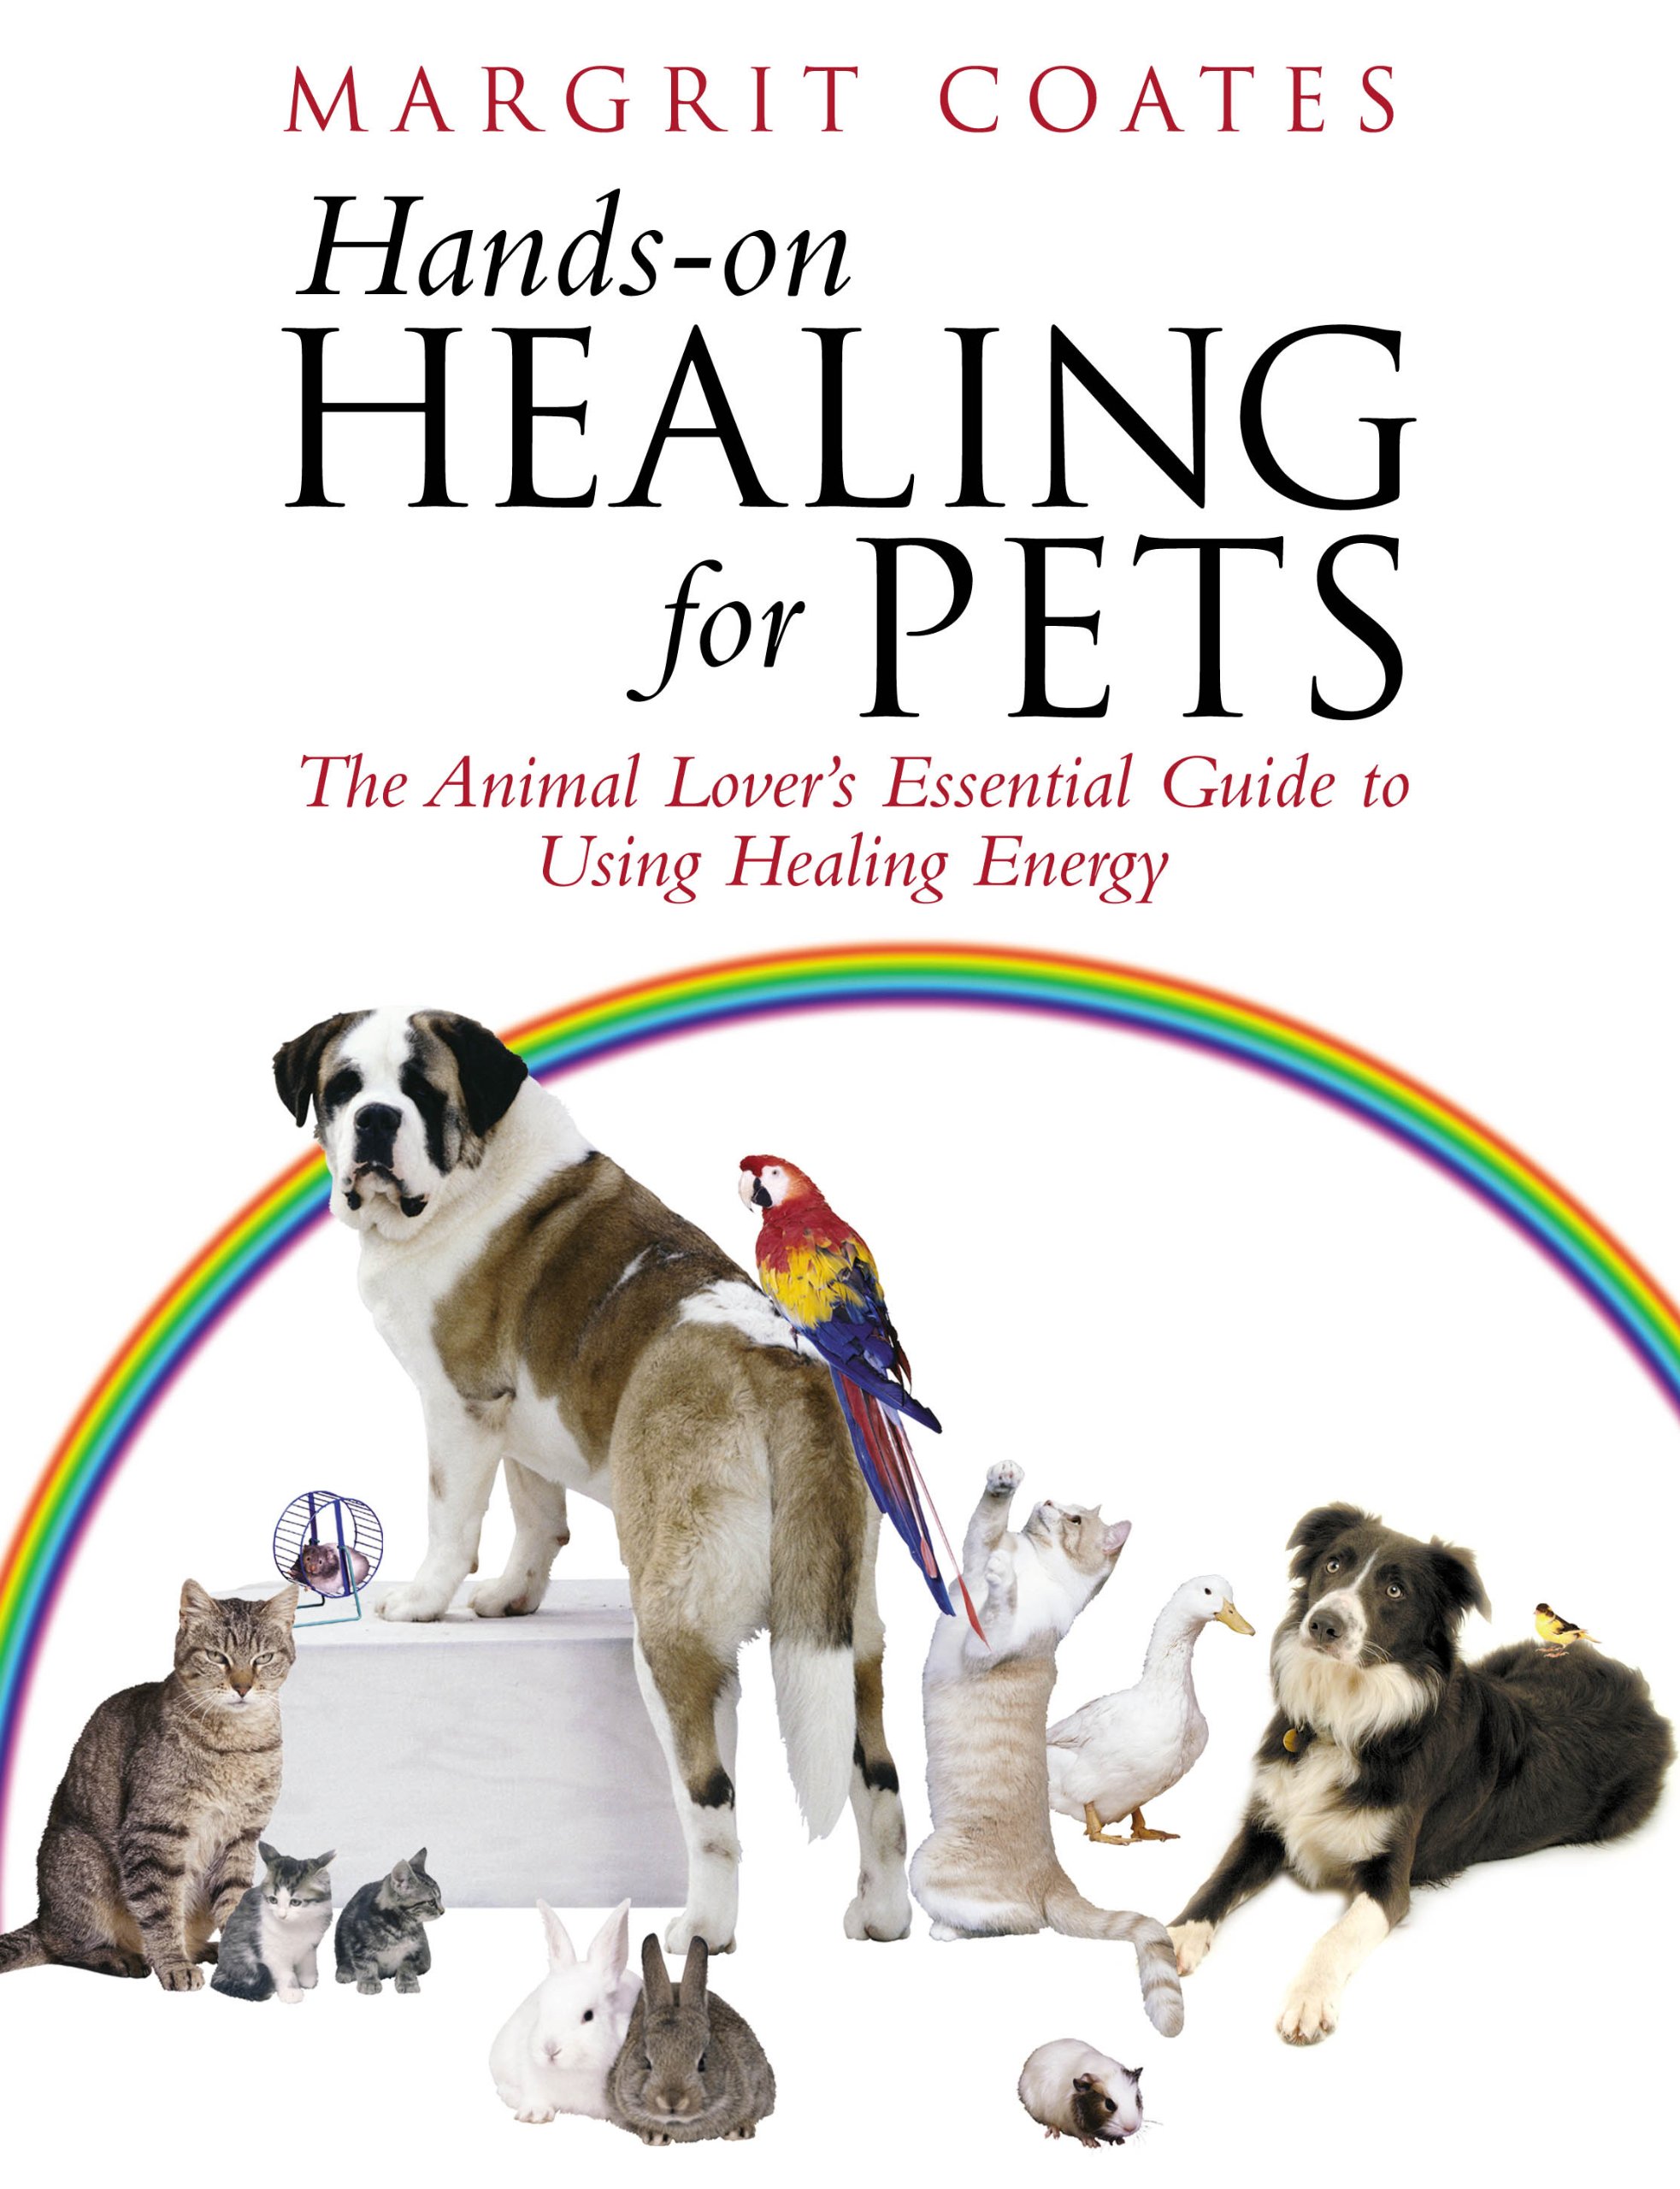 Hands-on Healing for Pets (engl.) [Coates]